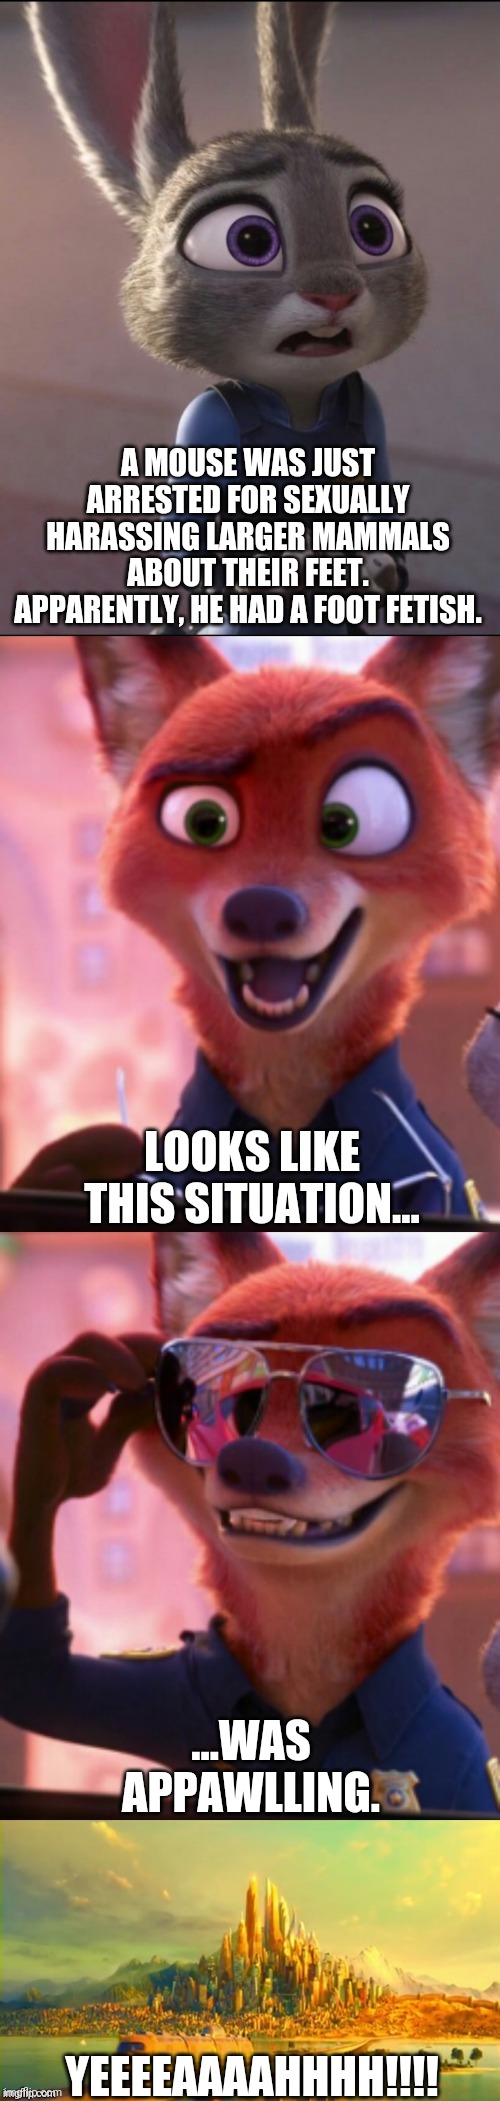 CSI: Zootopia 24 | A MOUSE WAS JUST ARRESTED FOR SEXUALLY HARASSING LARGER MAMMALS ABOUT THEIR FEET. APPARENTLY, HE HAD A FOOT FETISH. LOOKS LIKE THIS SITUATION... ...WAS APPAWLLING. YEEEEAAAAHHHH!!!! | image tagged in csi zootopia,zootopia,judy hopps,nick wilde,parody,funny | made w/ Imgflip meme maker